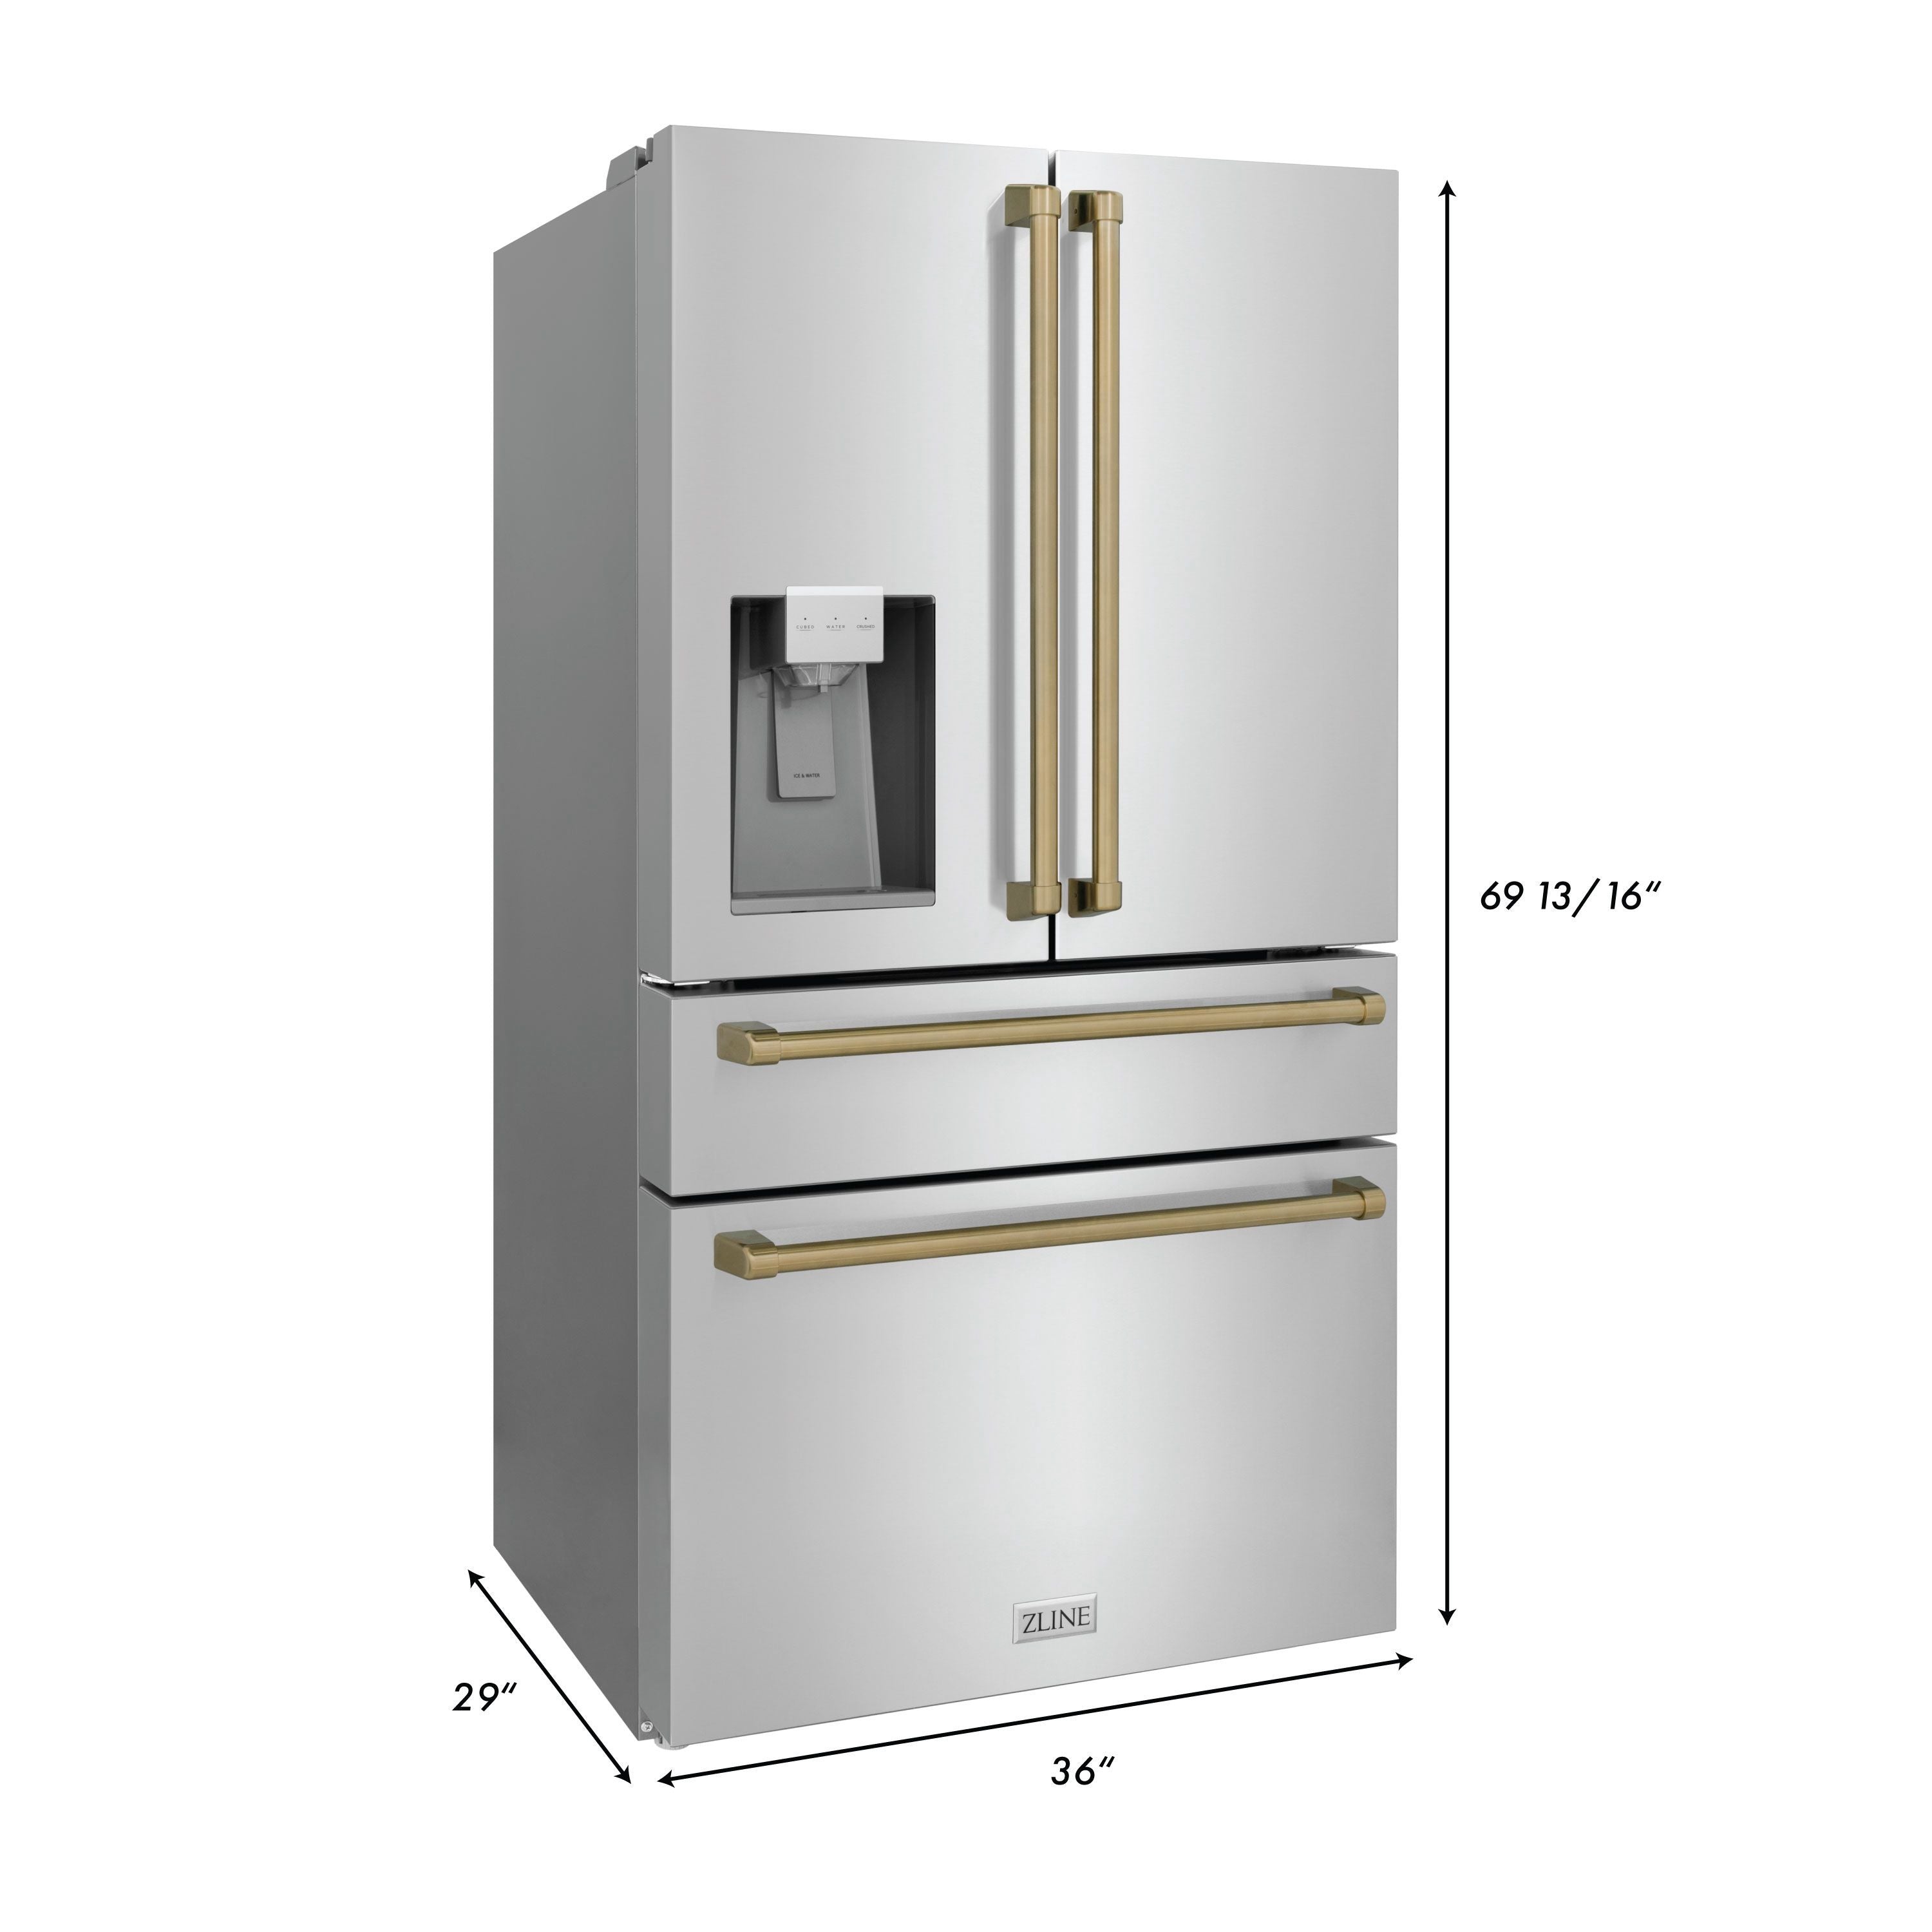 ZLINE 36 In. Autograph Refrigerator with Water and Ice Dispenser in Fingerprint Resistant Stainless Steel with Champagne Bronze Accents 10